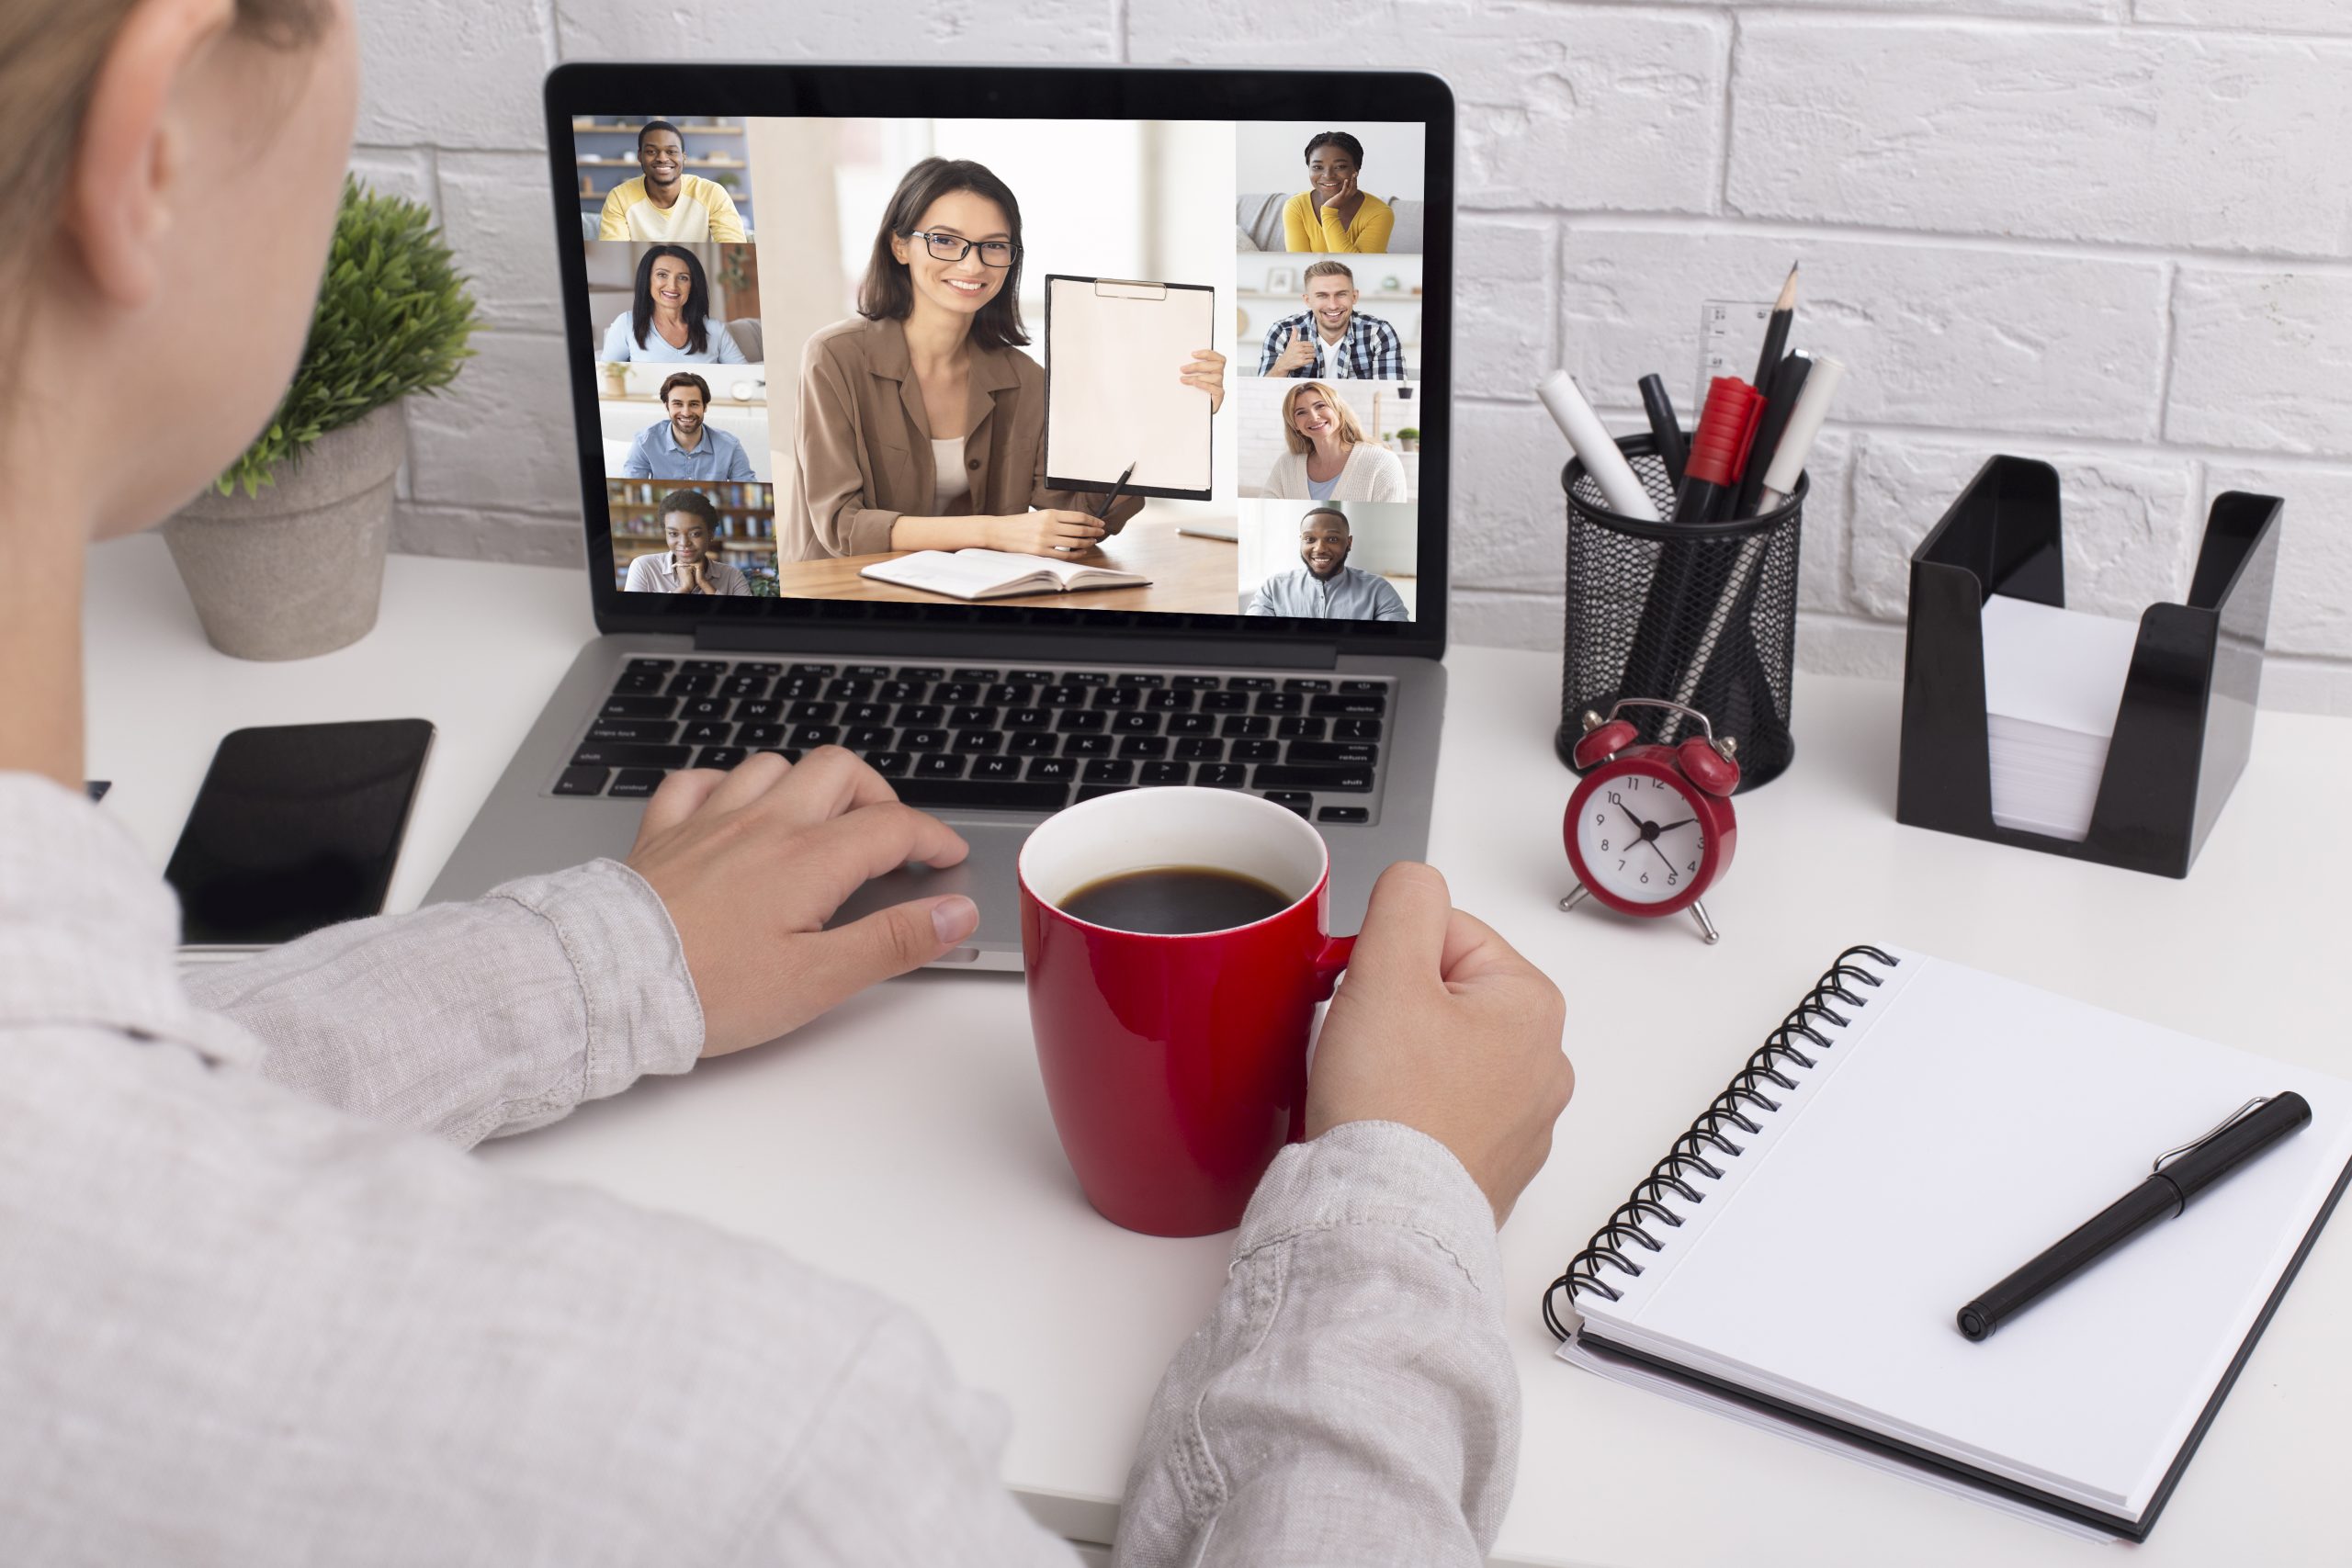 Online Training. Unrecognizable Woman Having Web Conference With Group Of Business People, Watching Webinar While Sitting With Laptop And Coffee At Workplace In Modern Office, Creative Collage